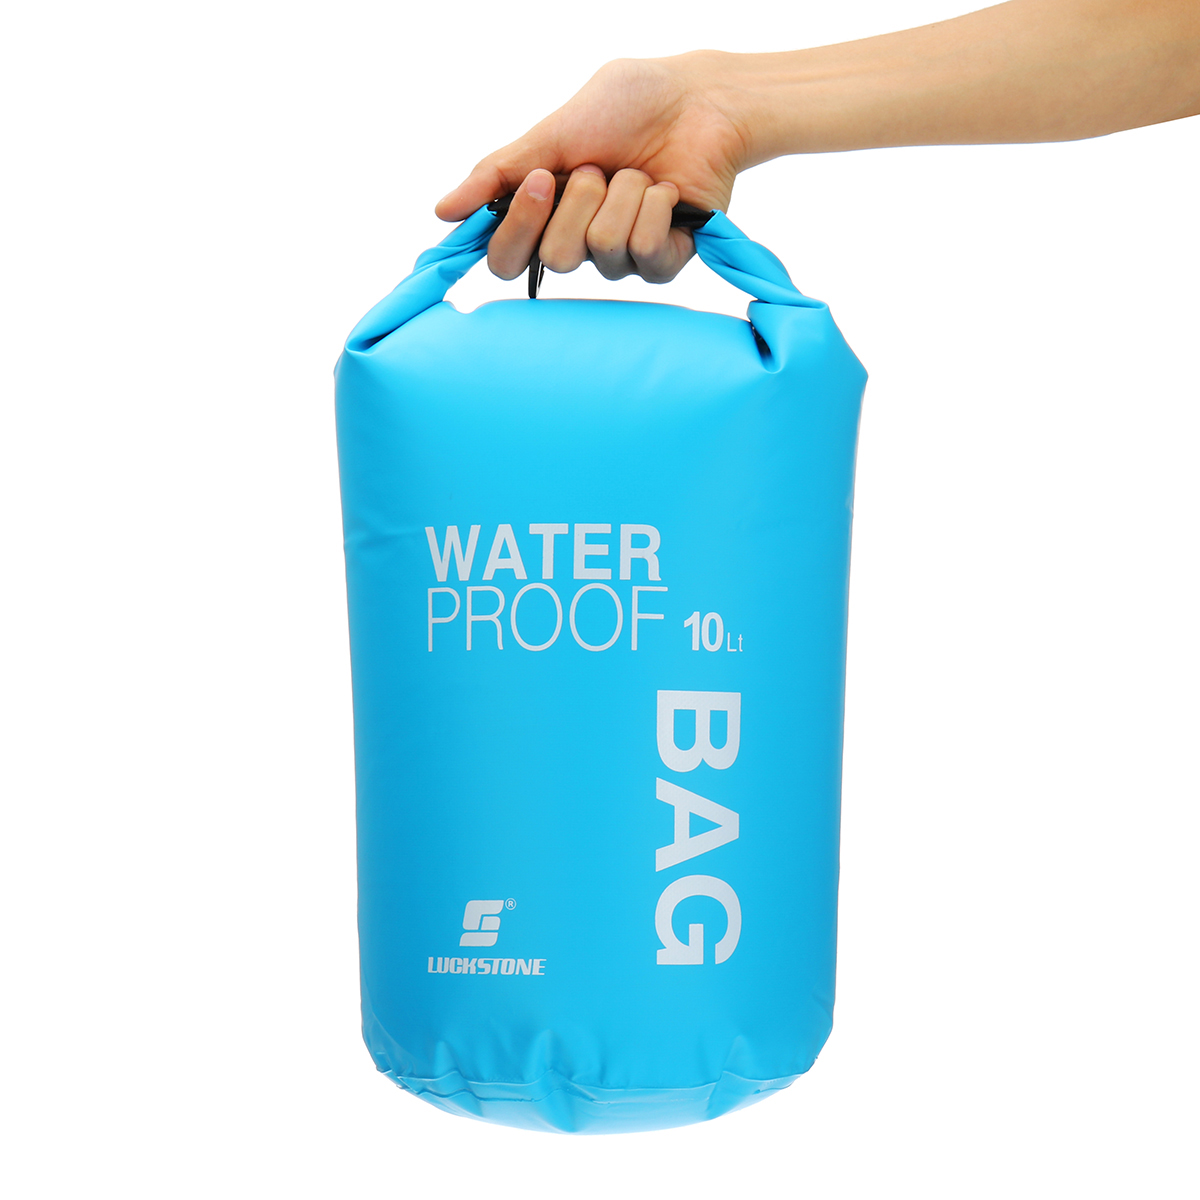 10L-Outdoor-Swimming-Air-Inflation-Floating-Mobile-Phone-Camera-Storage-PVC-Waterproof-Bag-1820807-10